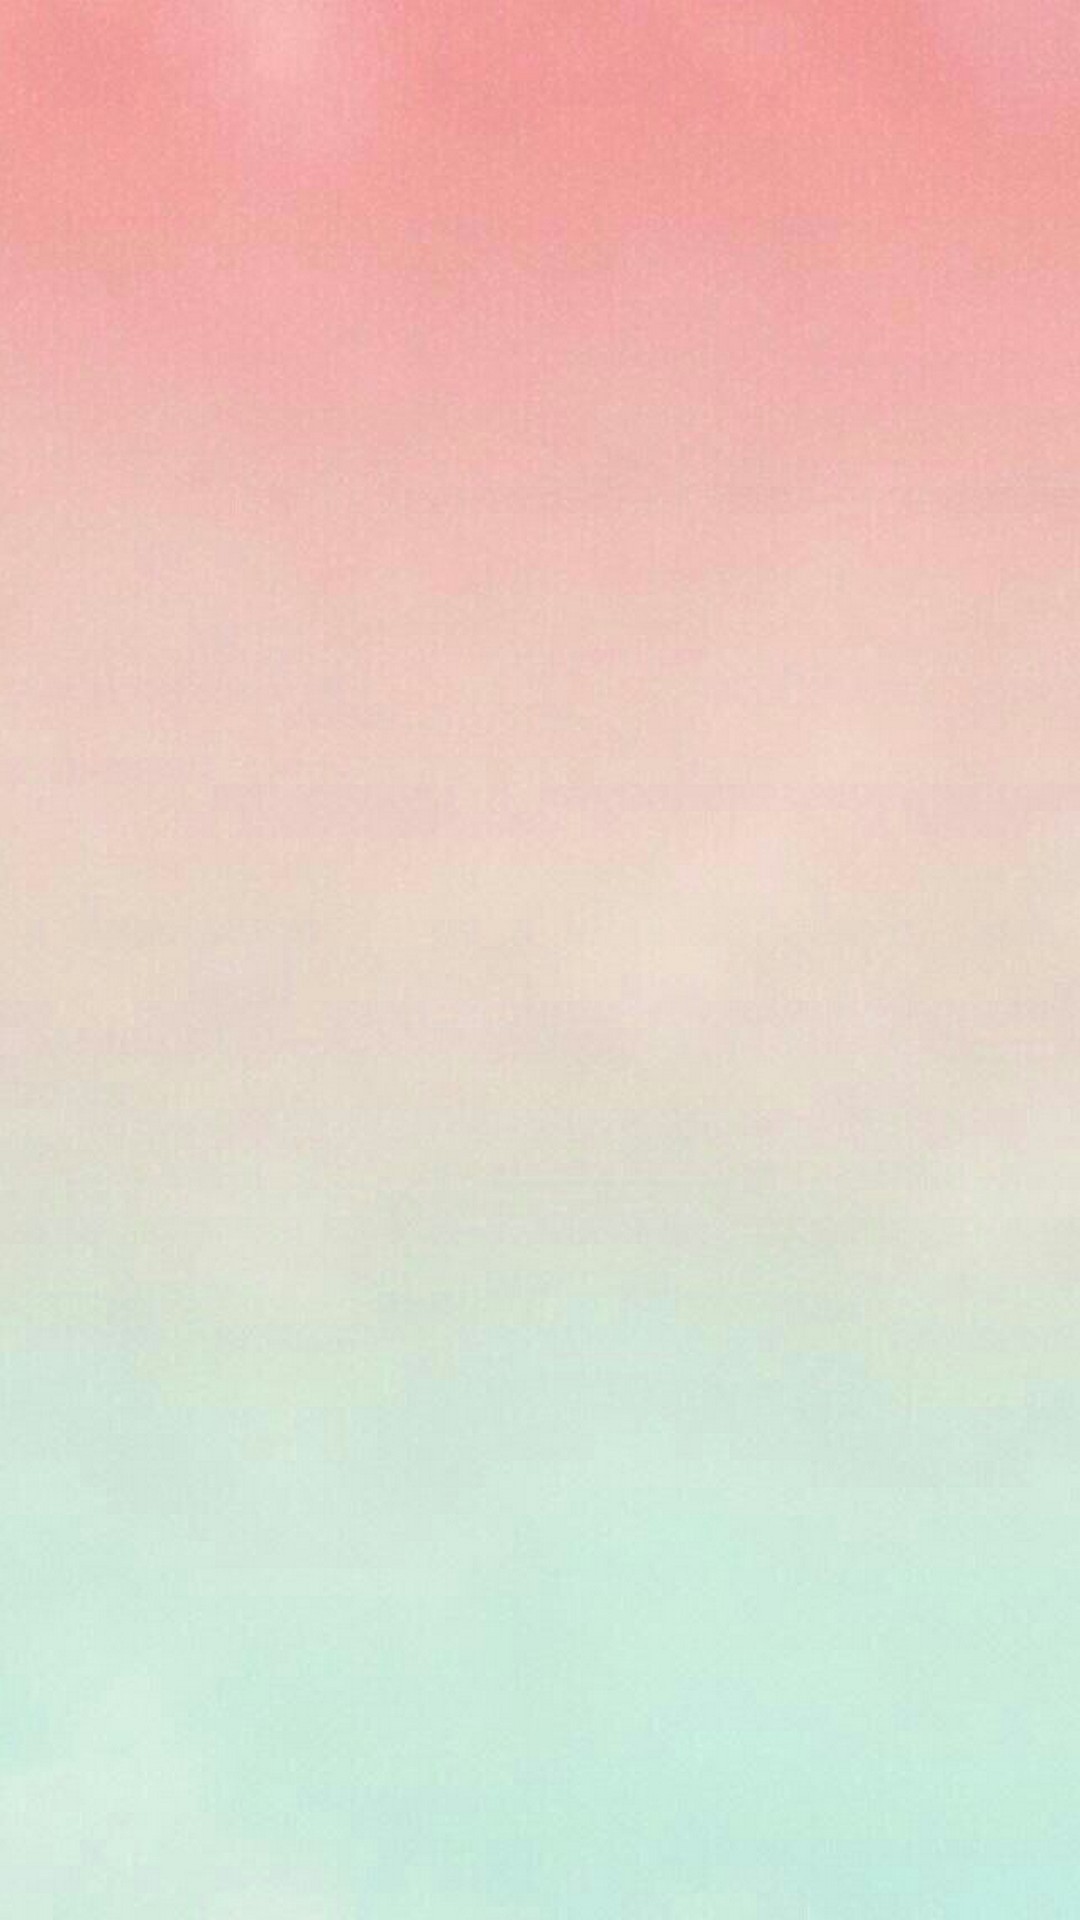 Cute Girl Pic Hd Wallpaper For Iphone With High-resolution - Peach And Blue Ombre - HD Wallpaper 